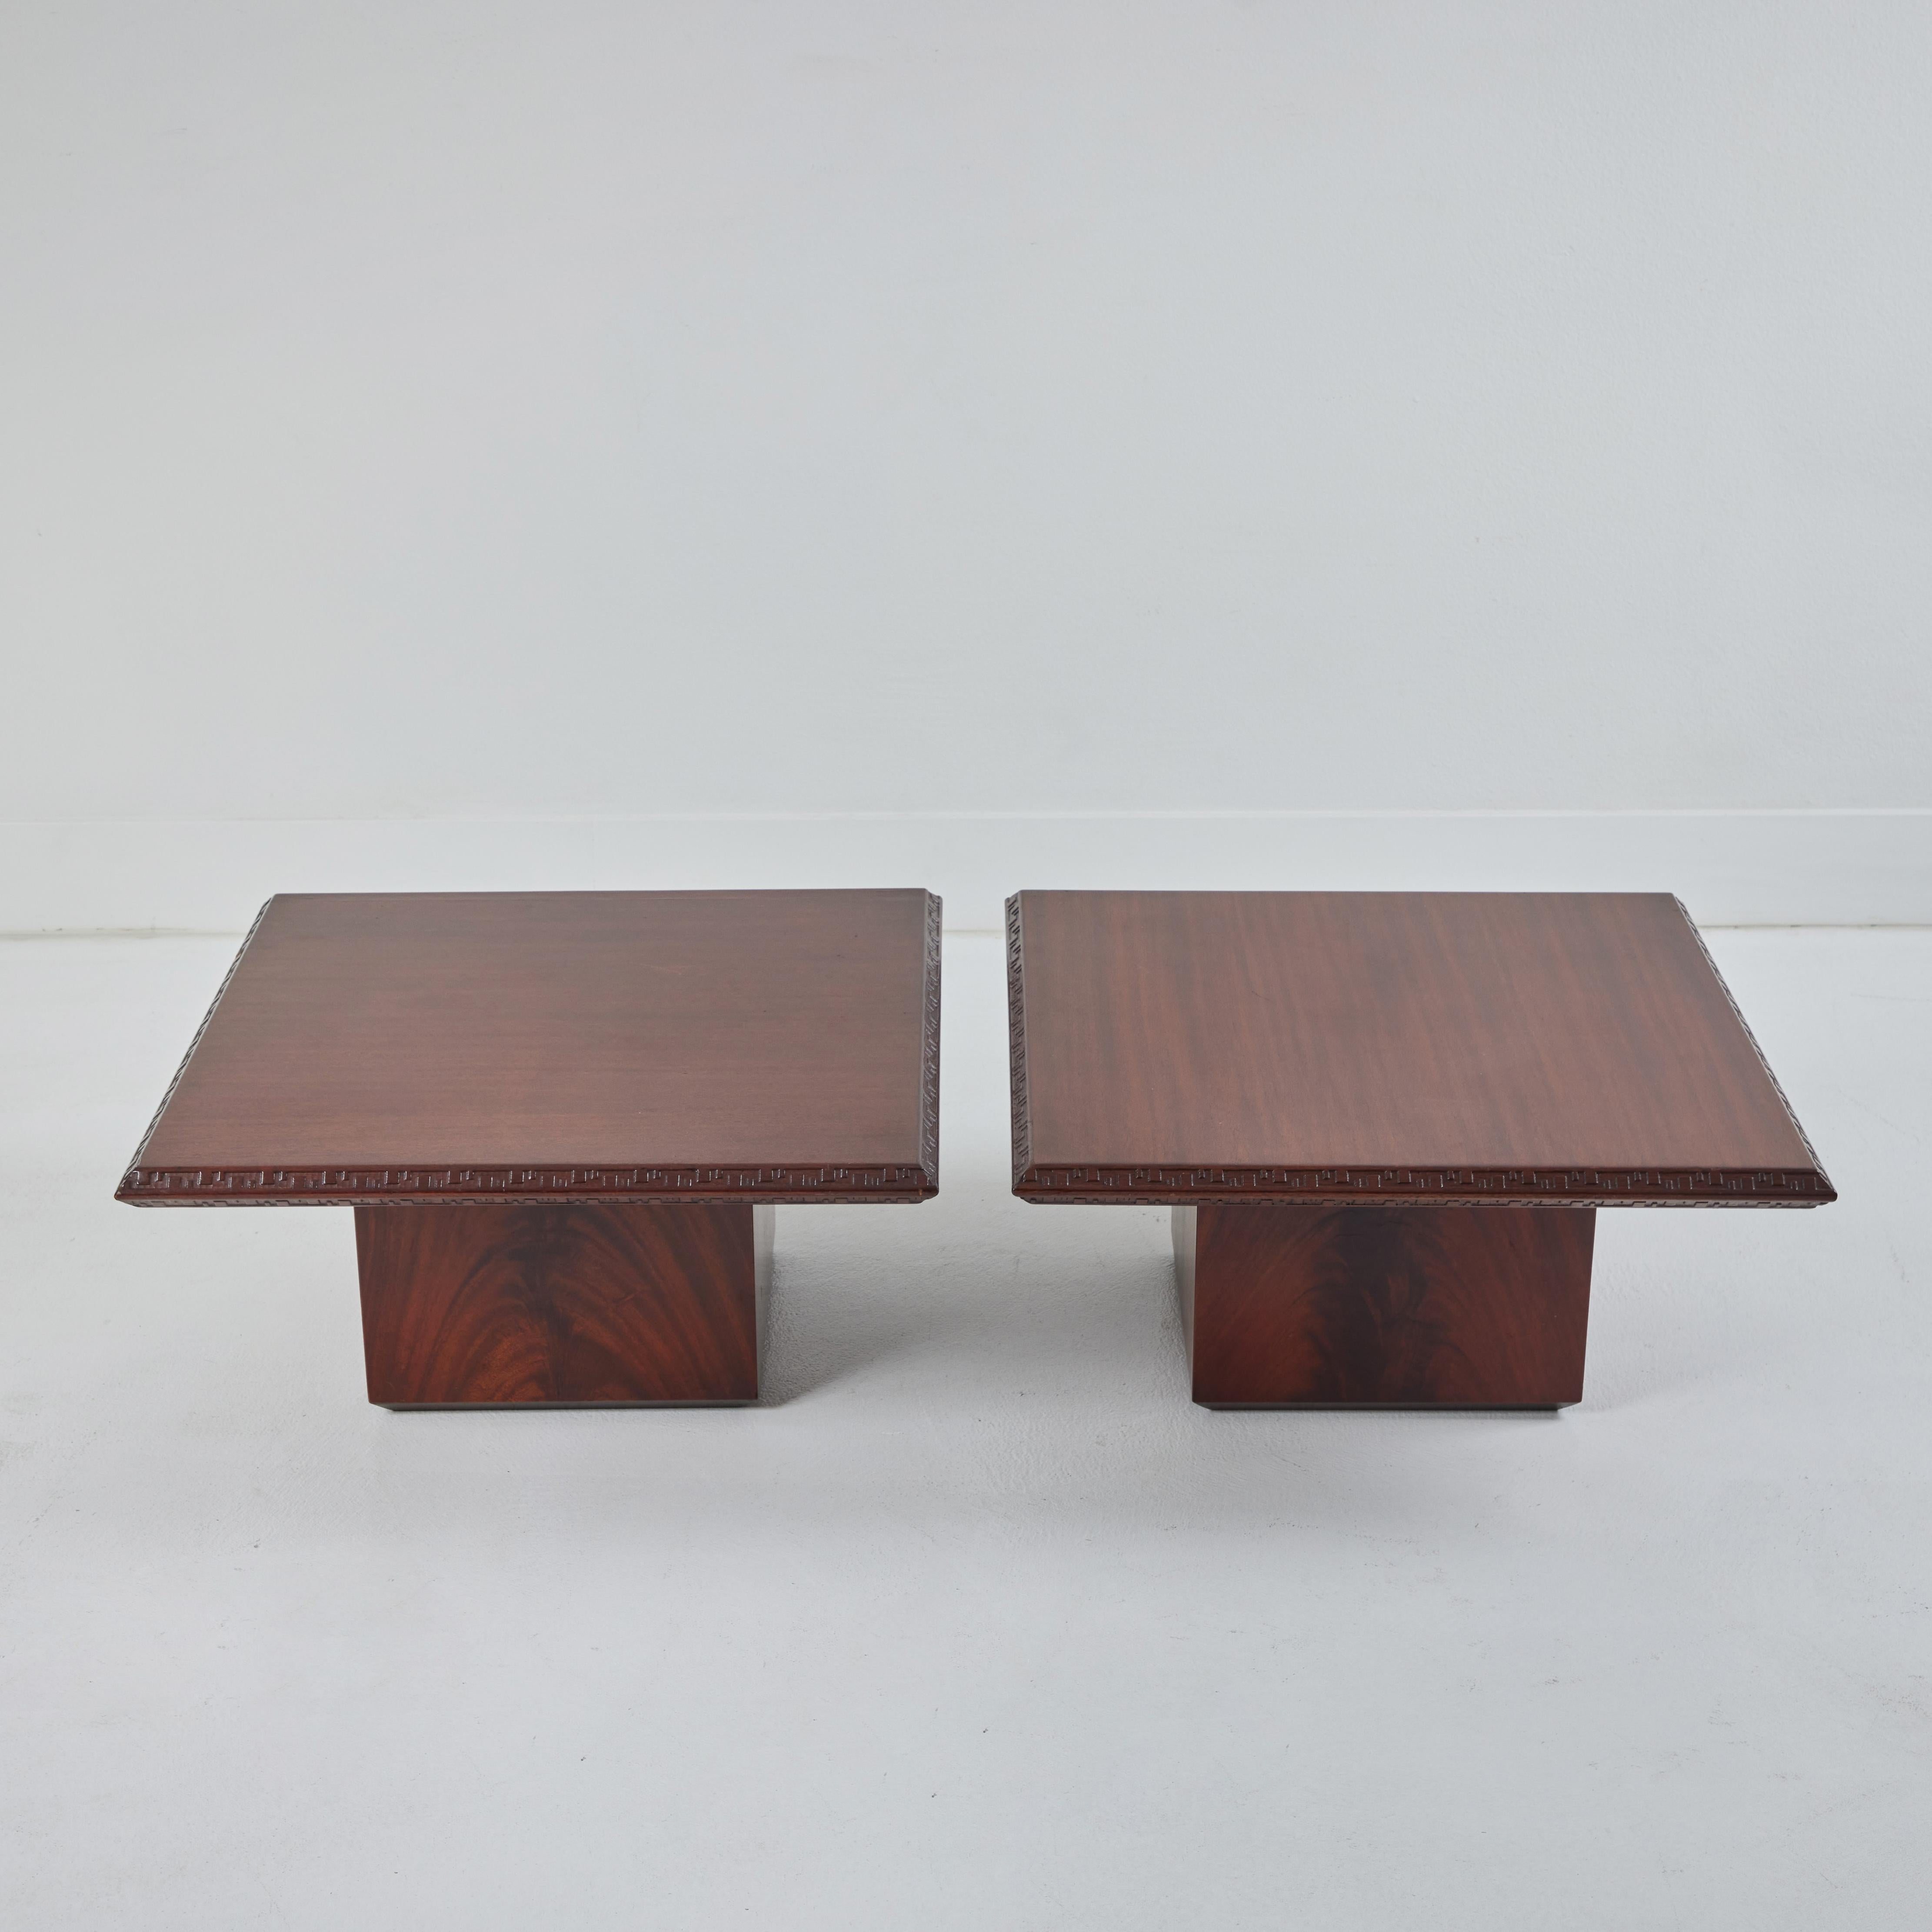 Here are a pair of low mahogany cocktail tables designed by Frank Loyd Wright as part of his Taliesin collection. Designed in 1955 for Heritage Henredon, these tables are beautifully constructed. Made from mahogany, these sleek low coffee tables are